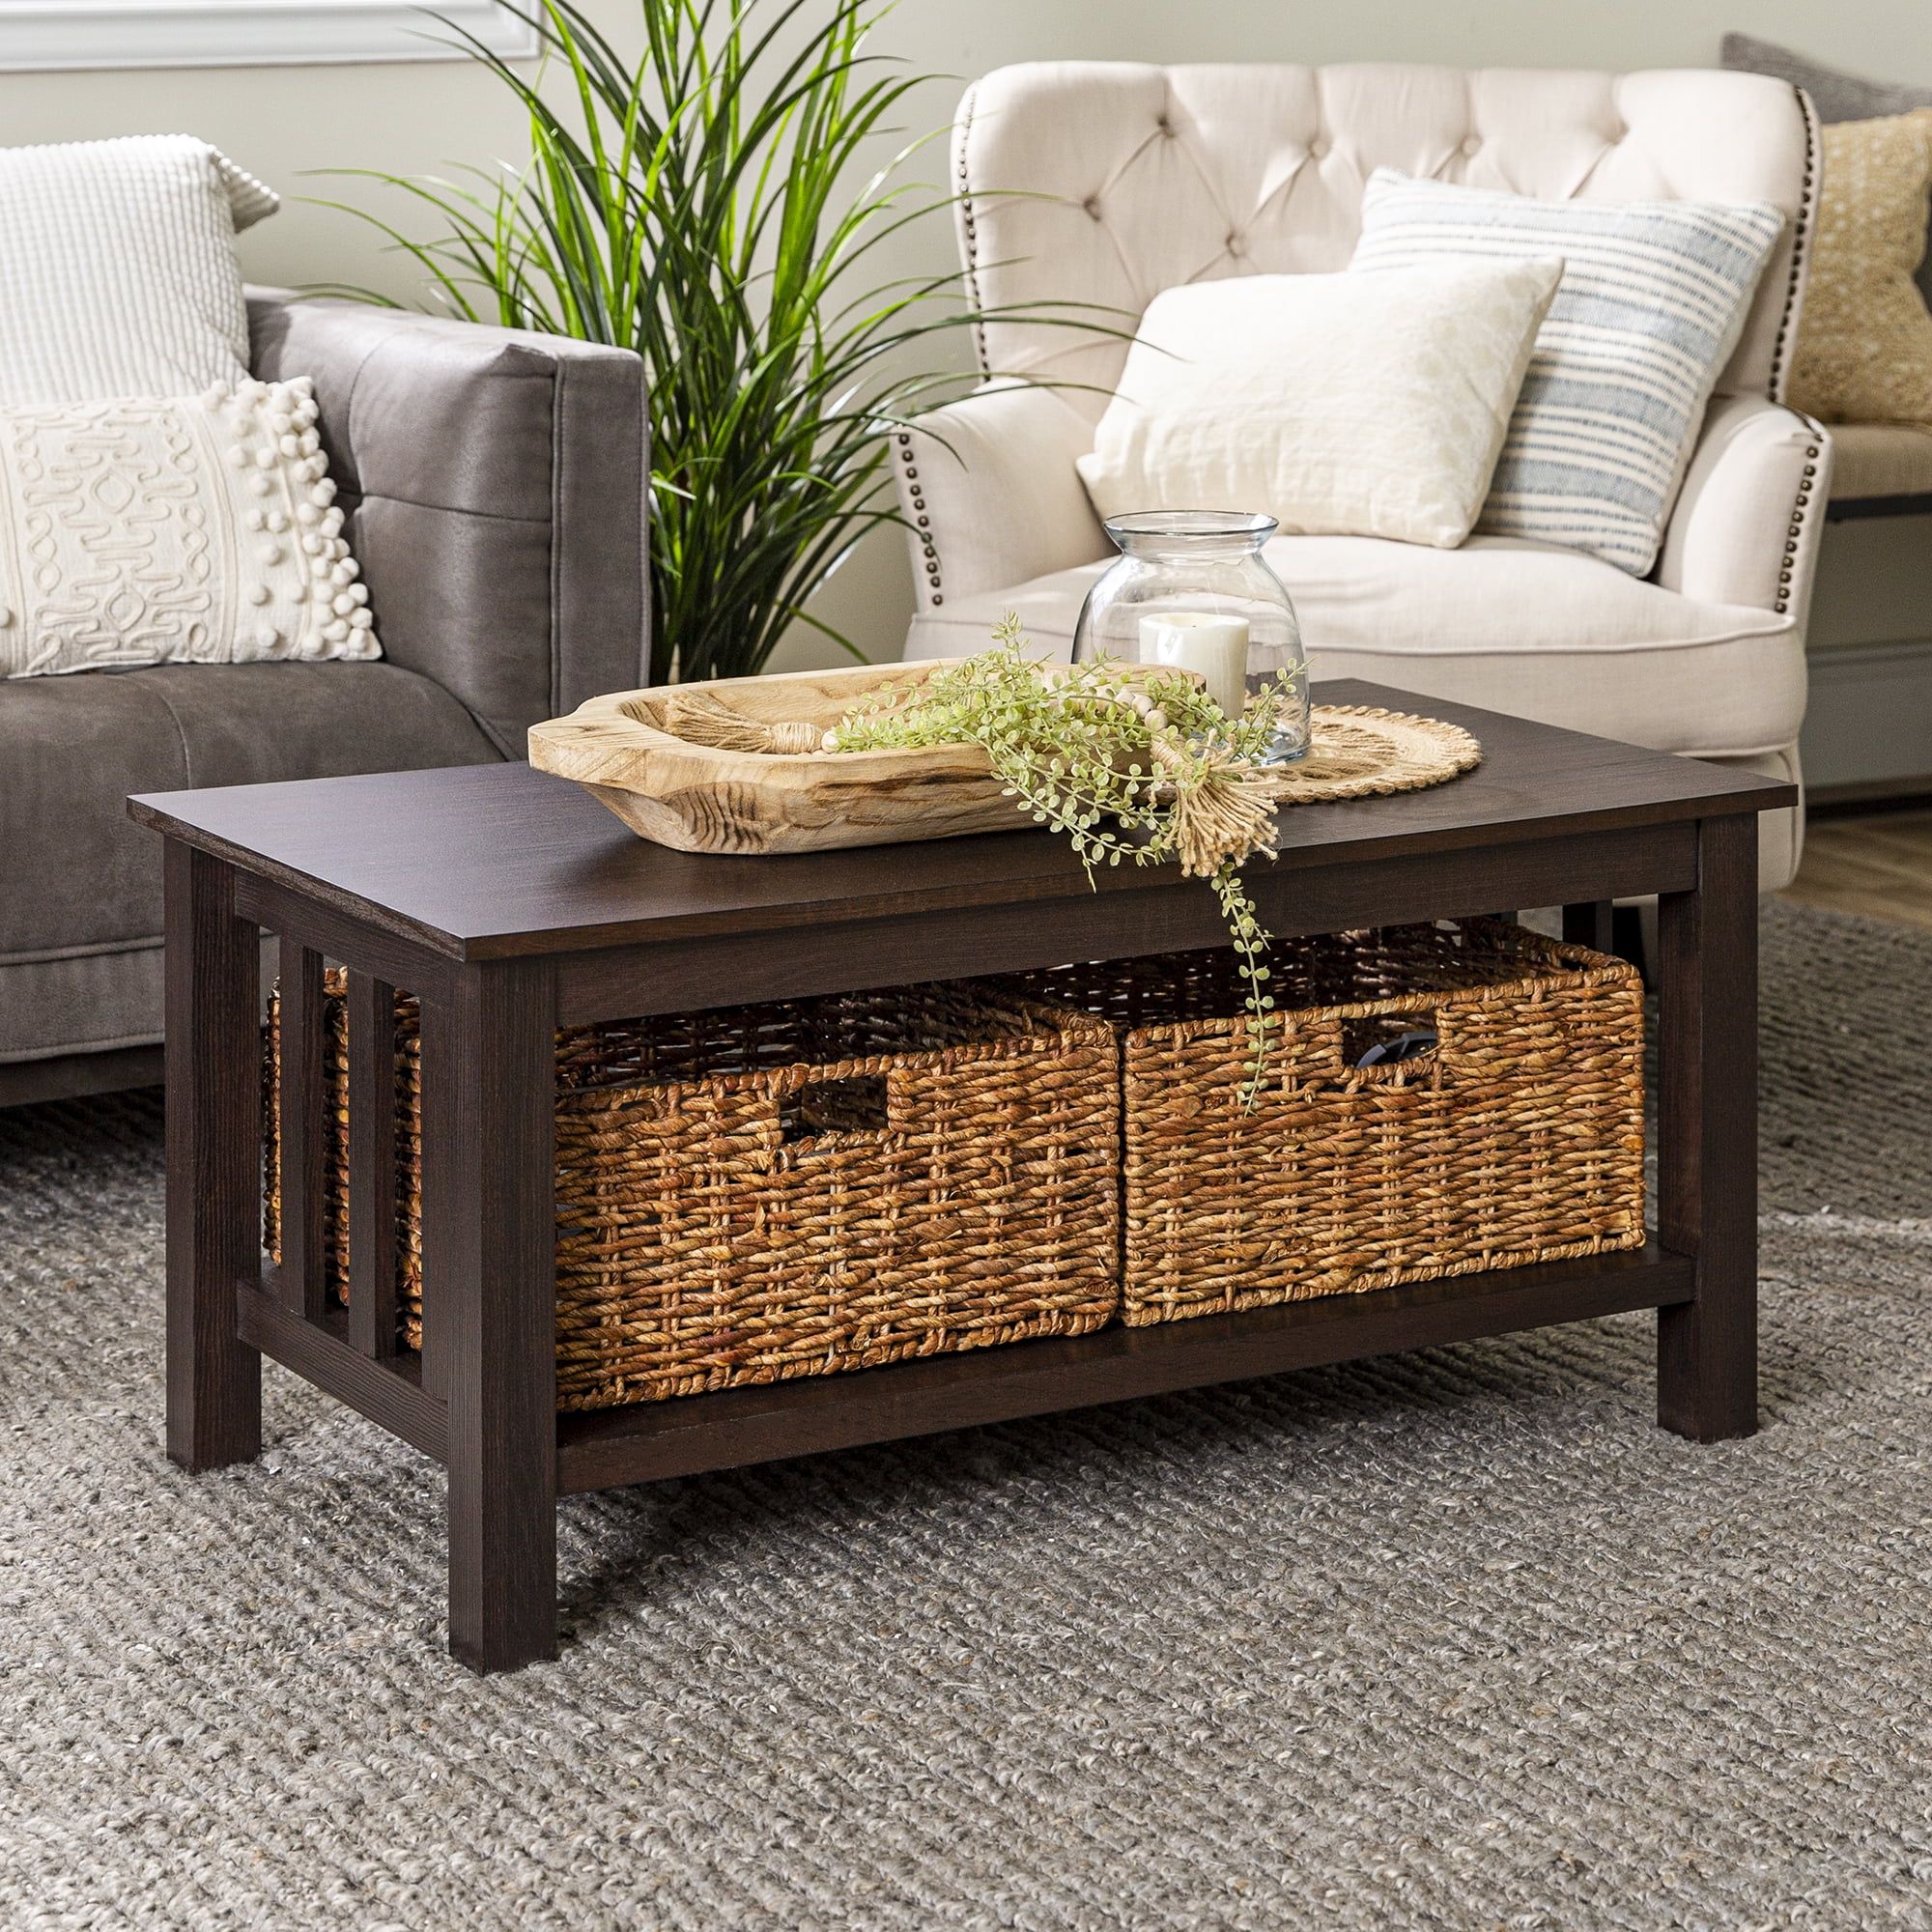 Woven Paths Traditional Storage Coffee Table With Bins, Espresso Throughout Woven Paths Coffee Tables (View 5 of 20)